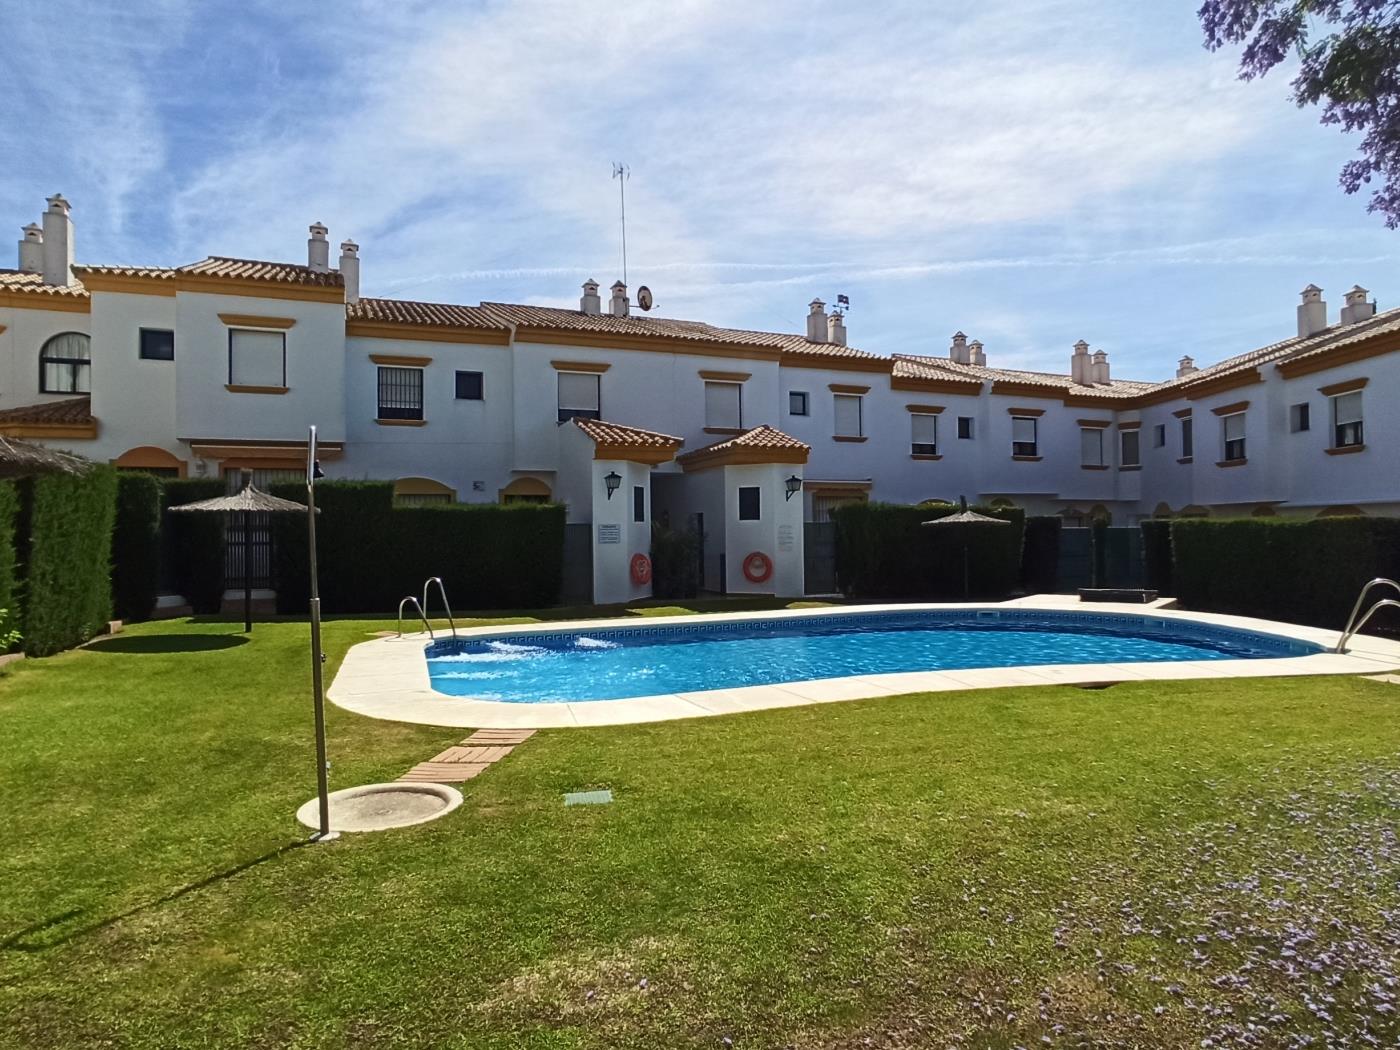 House for 8 in Las redes, close to the beach